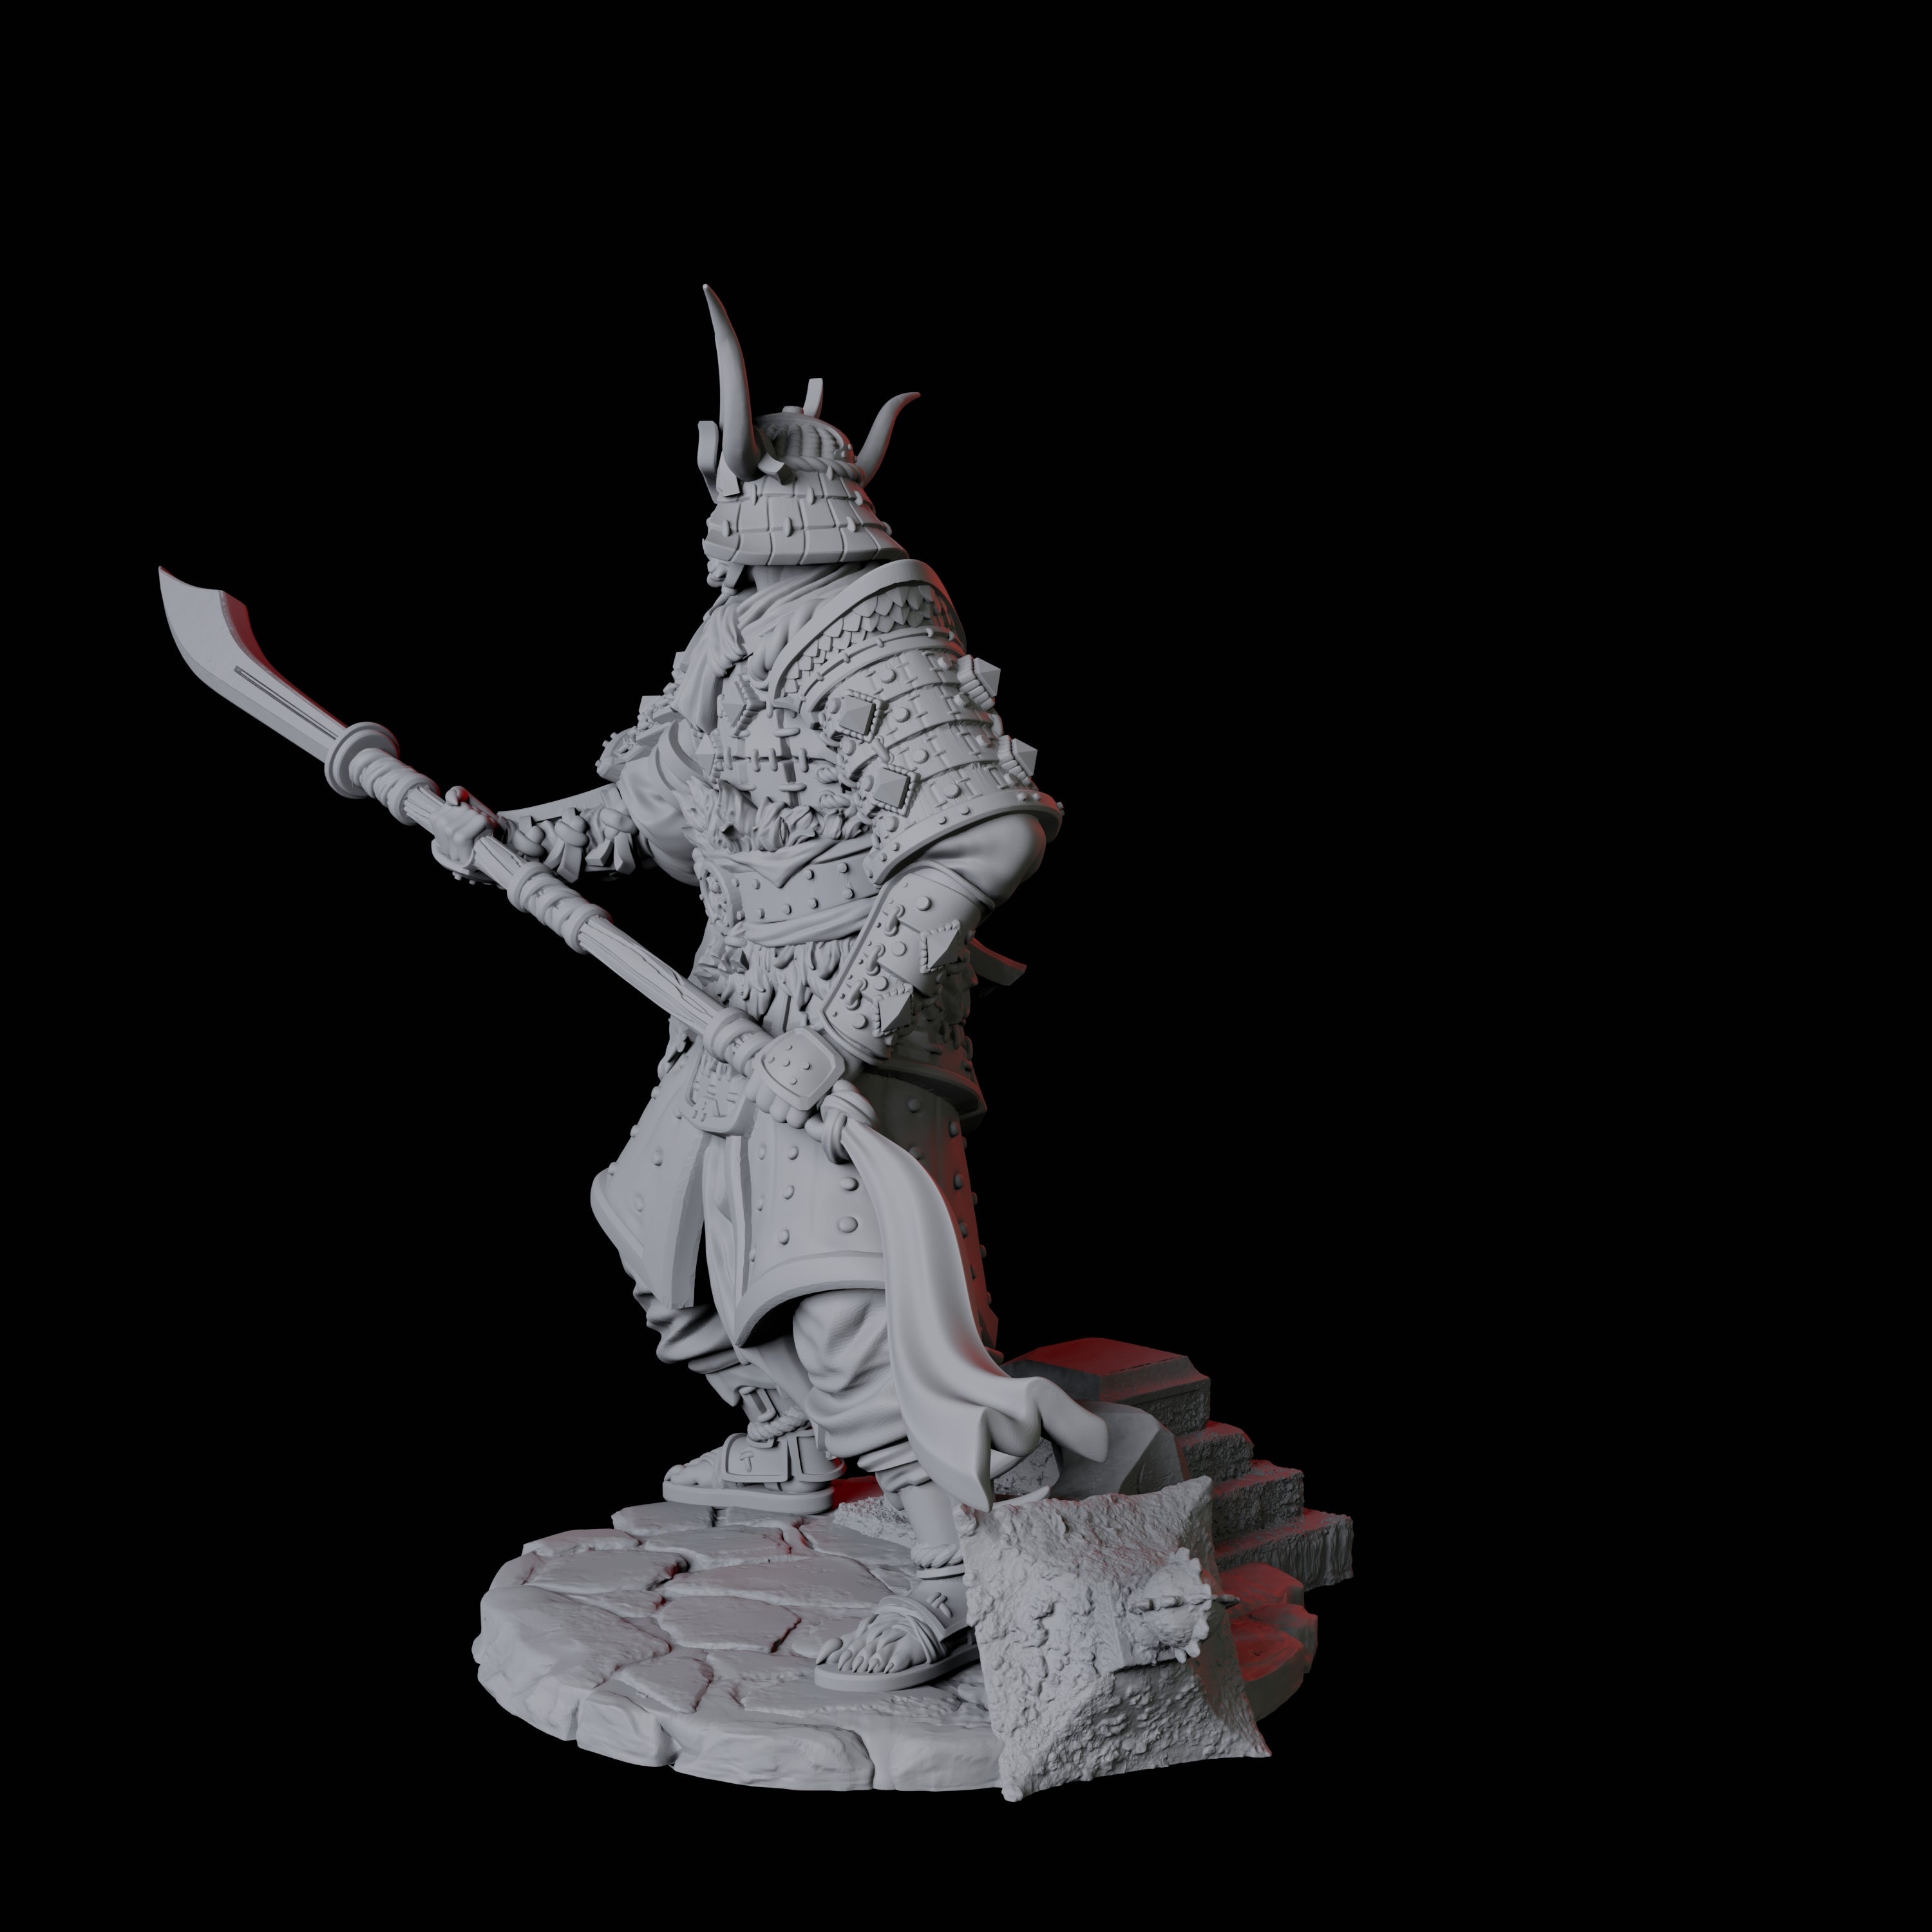 Oni Death Samurai B Miniature for Dungeons and Dragons, Pathfinder or other TTRPGs